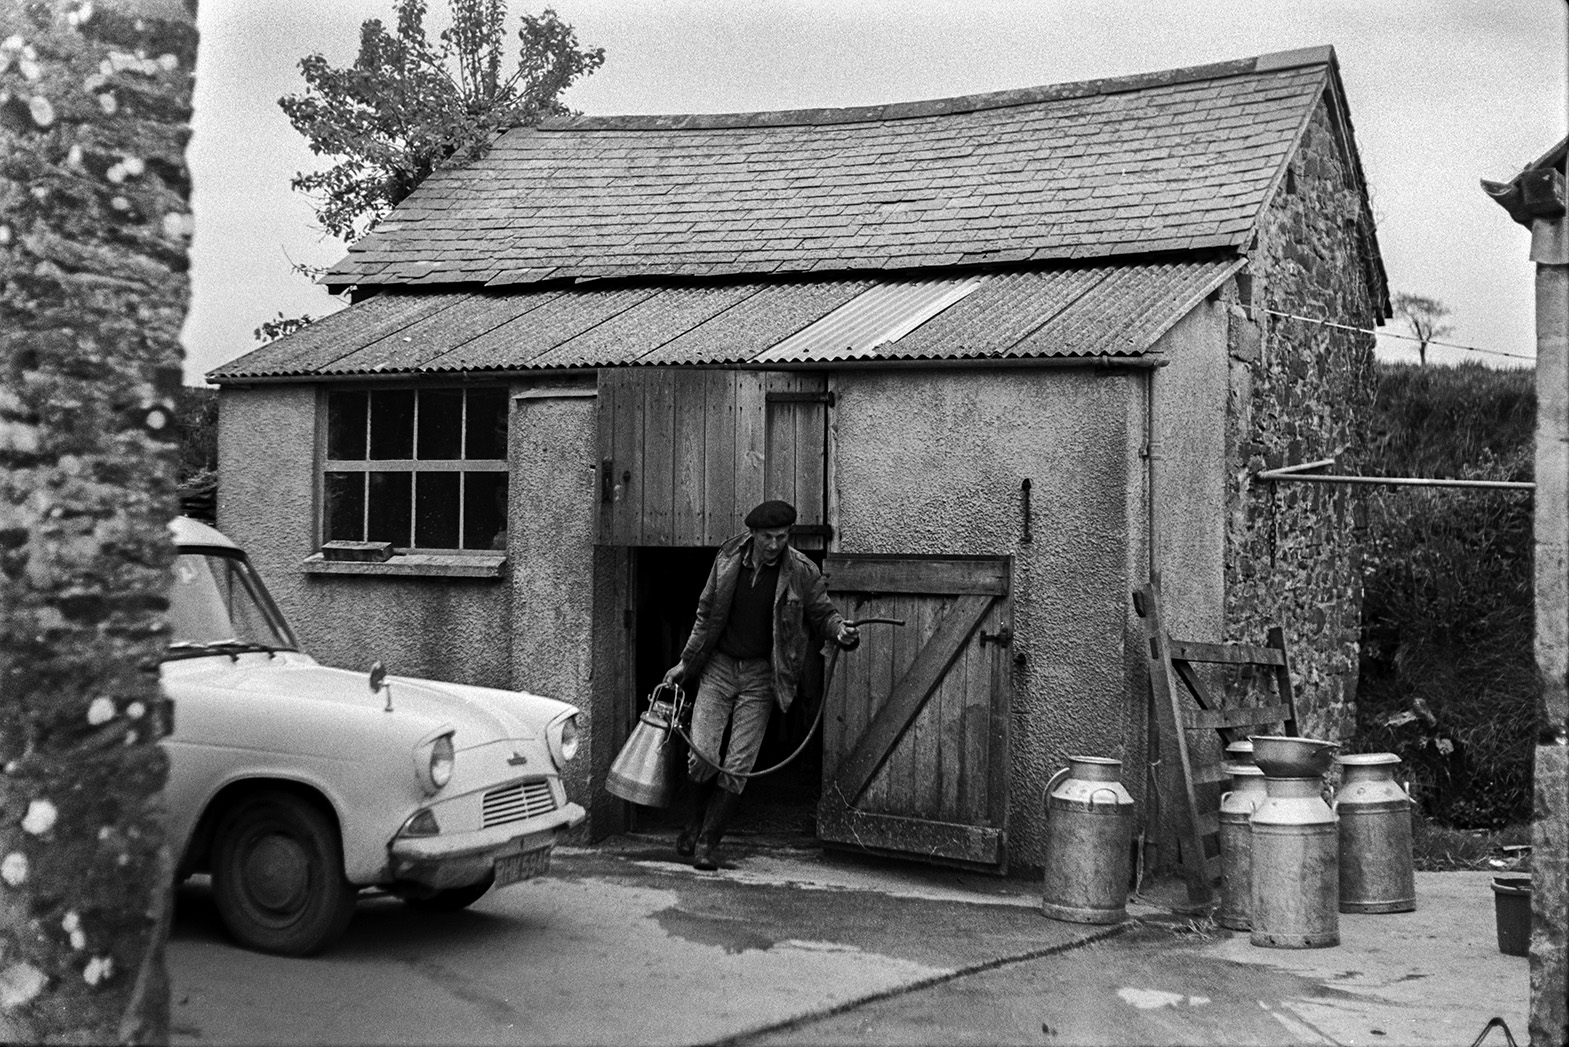 Ivor Bourne walking out of milking parlour carrying a milking machine at Mill Road Farm, Beaford. A car and milk churns are in the farmyard. The farm was also known as Jeffrys.